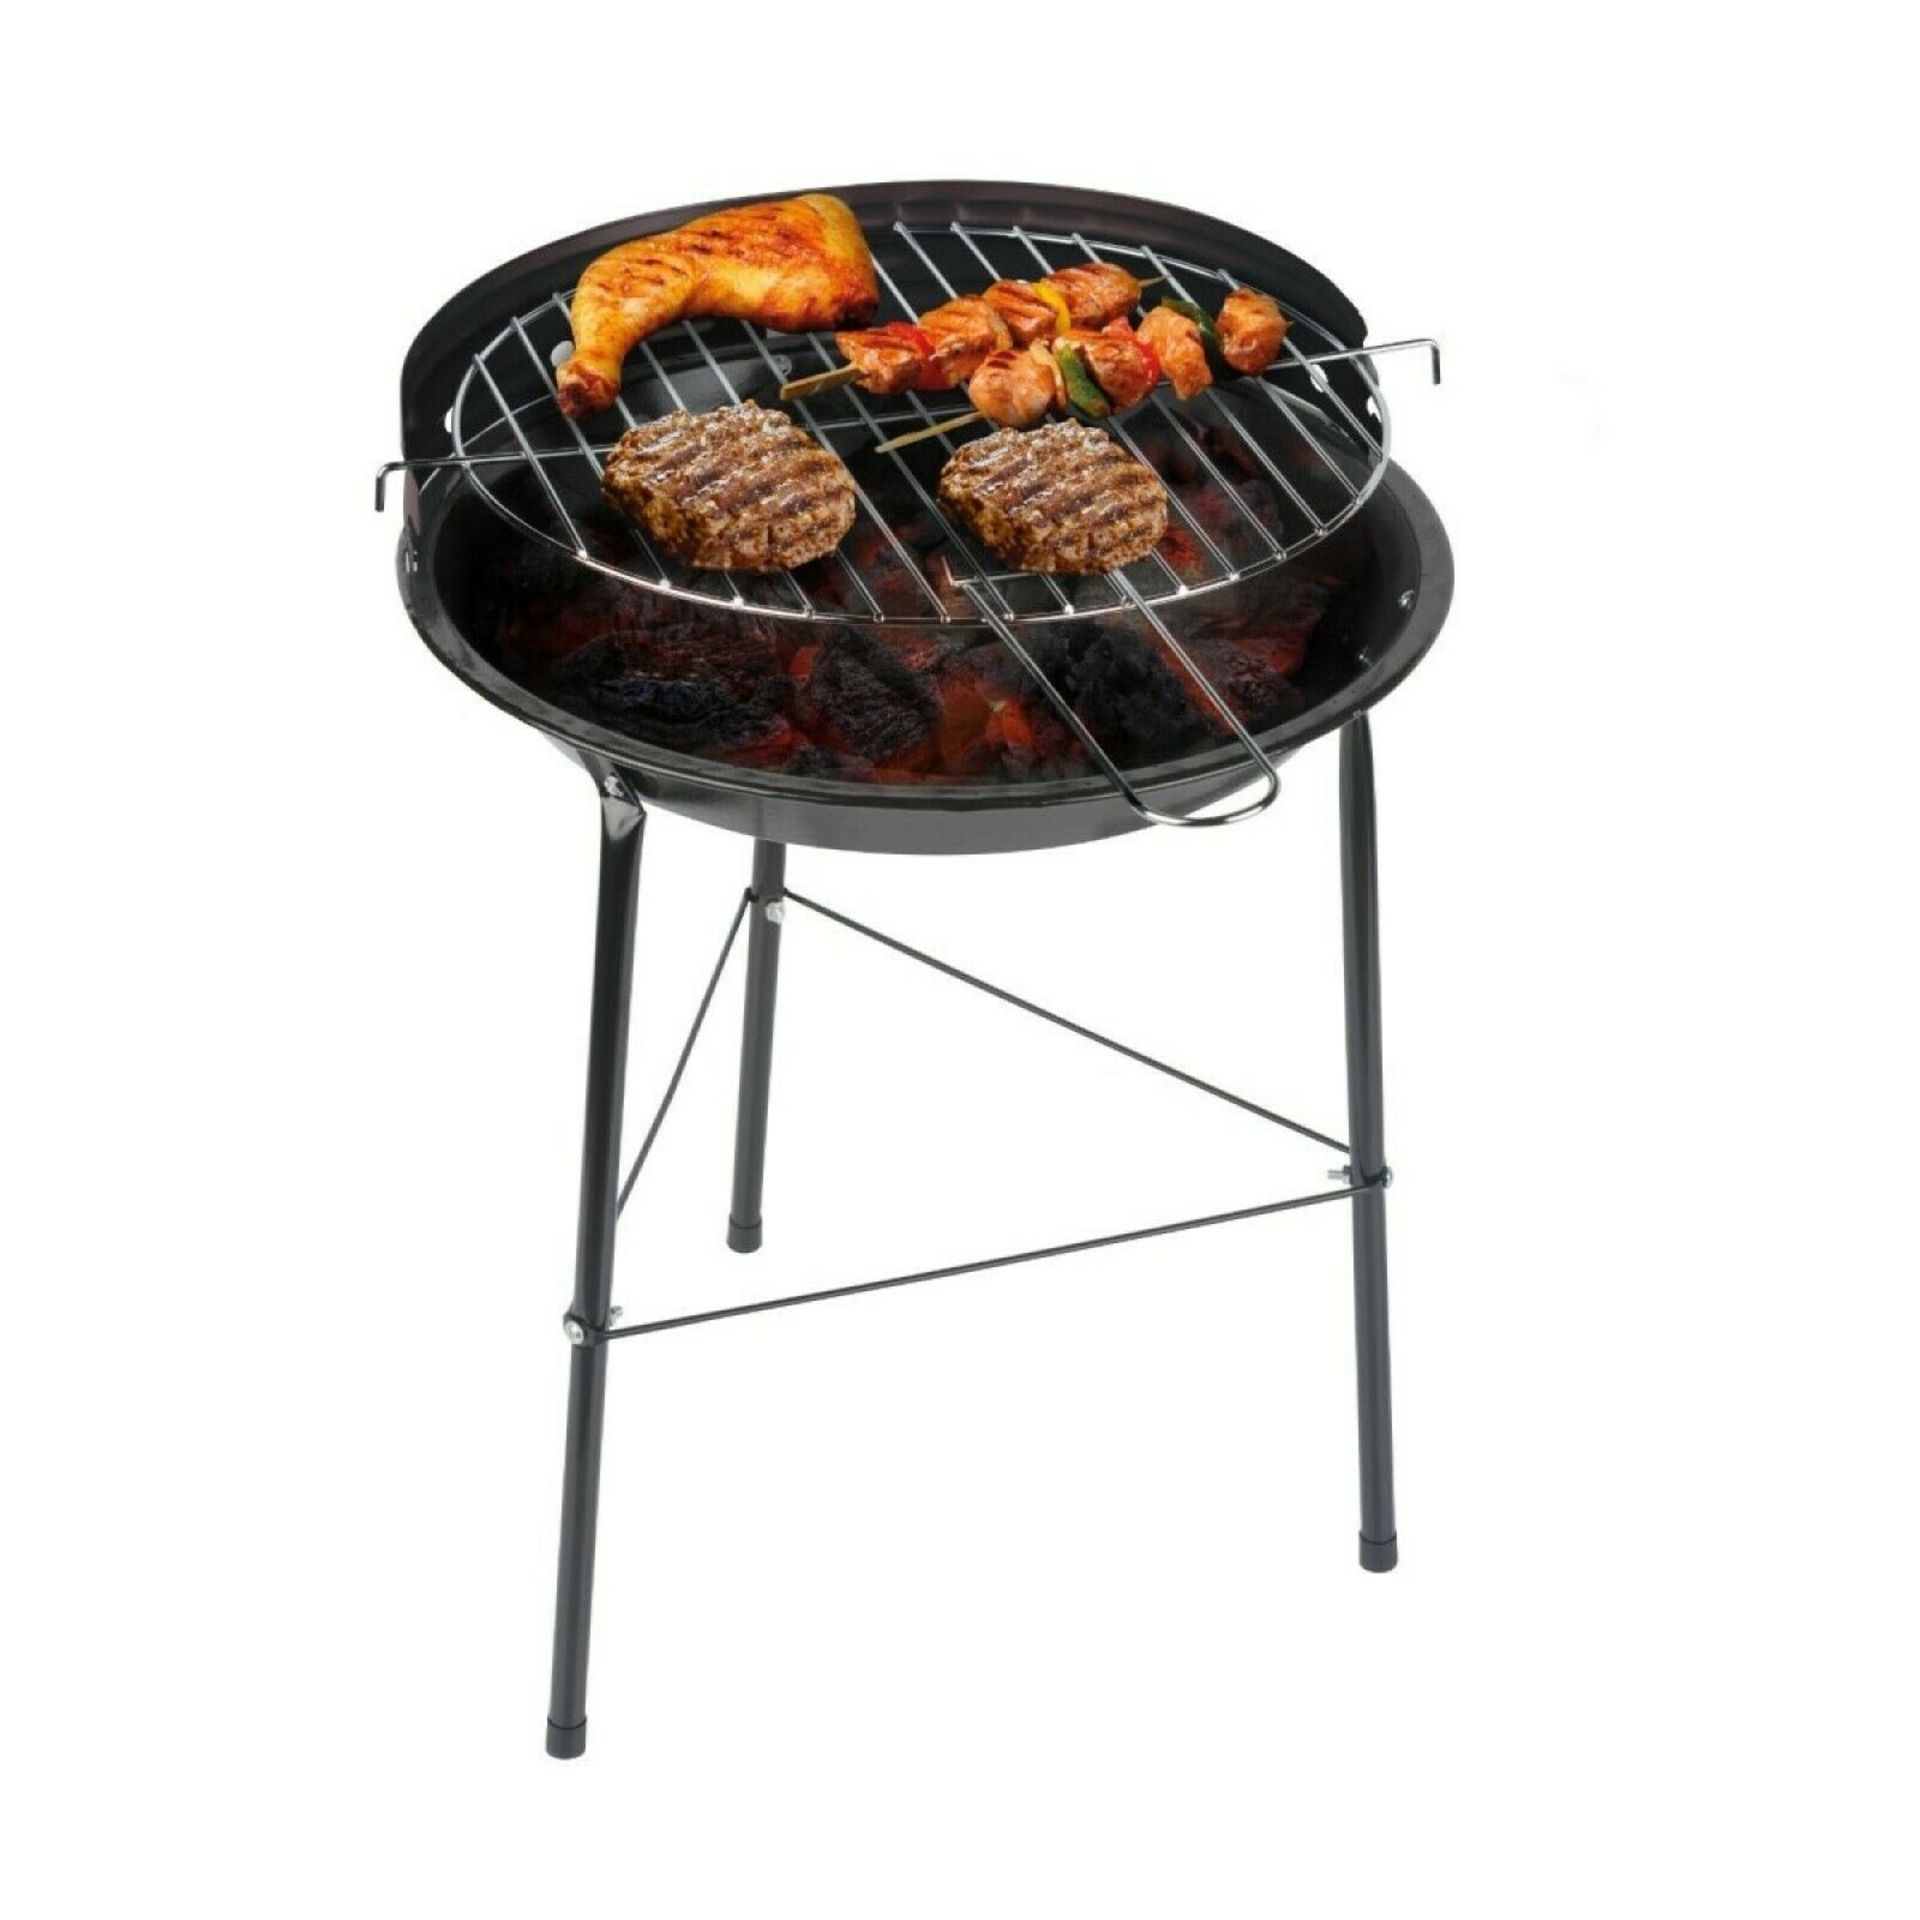 New 43cm Barbeque Grill